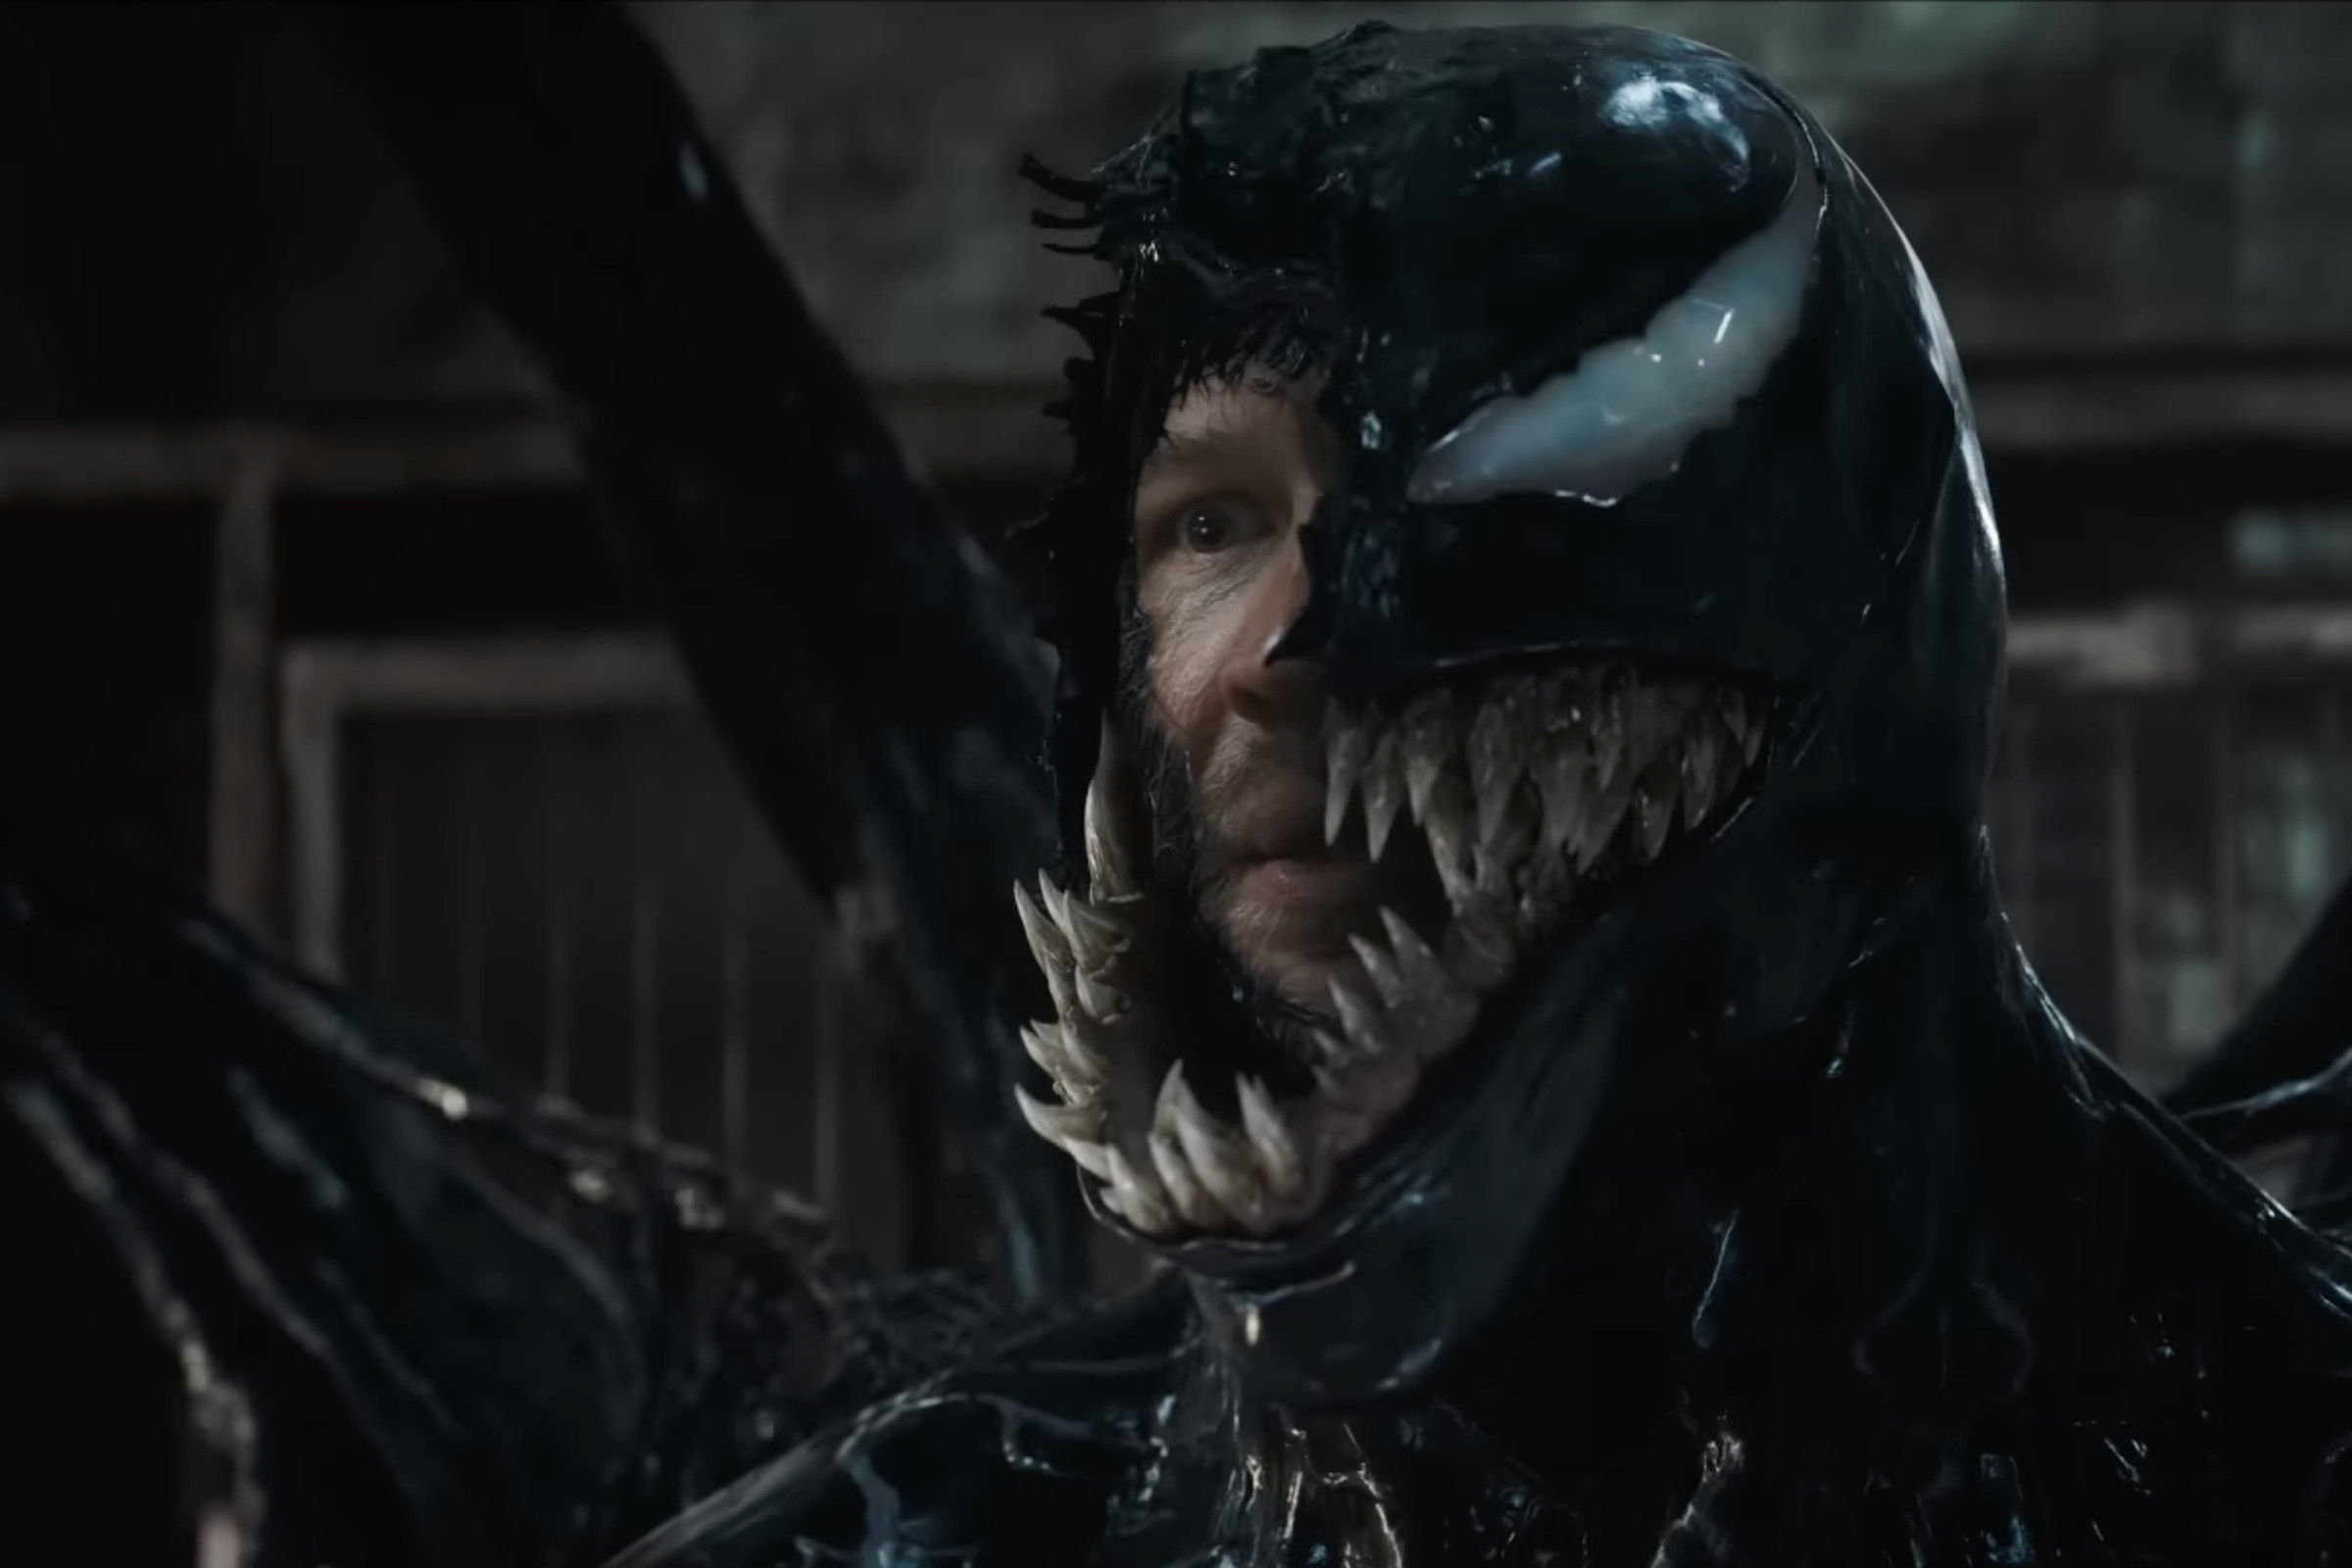 Picture of Venom with part of his mask removed, exposing Eddie Brock’s face.